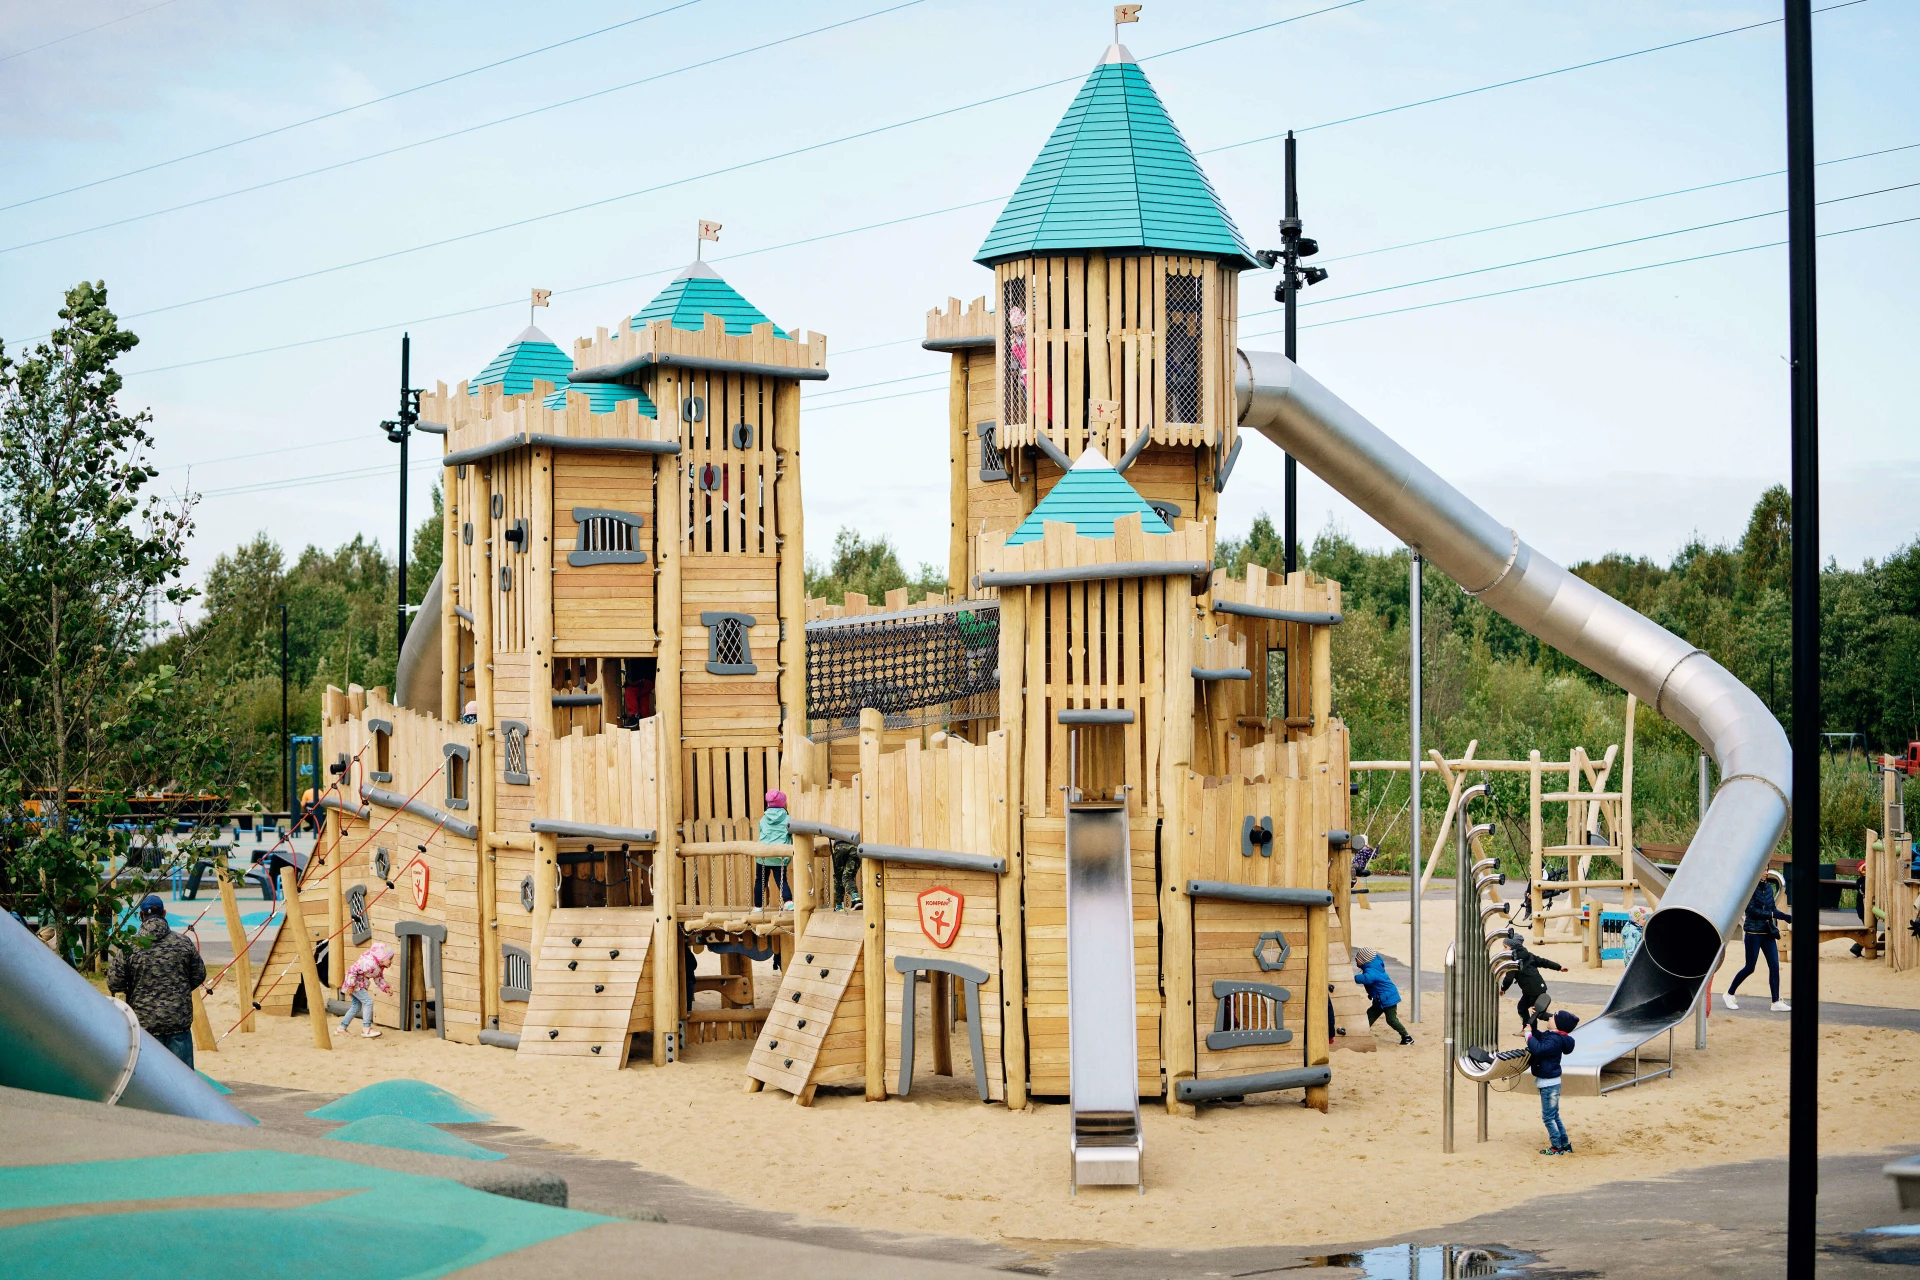 Large wooden playground castle sitting on top of sand surfacing. The castle has a large metal tunnel slide going from the top to the bottom. Showstopping pieces like this one are ideal for playground projects at zoos and other leisure facilities.